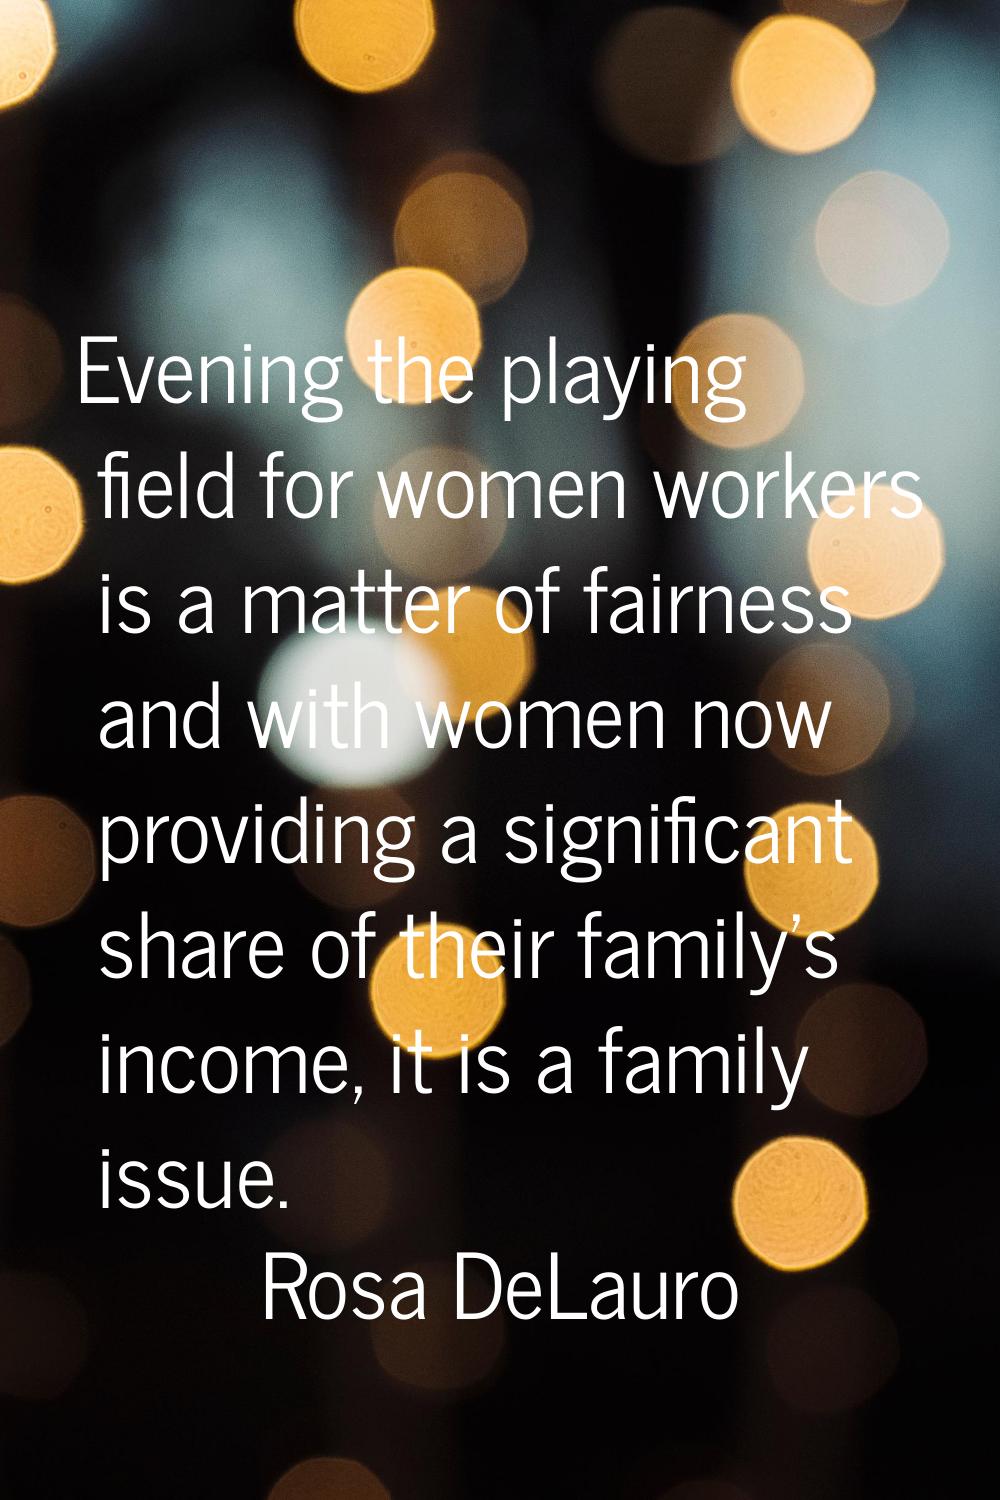 Evening the playing field for women workers is a matter of fairness and with women now providing a 